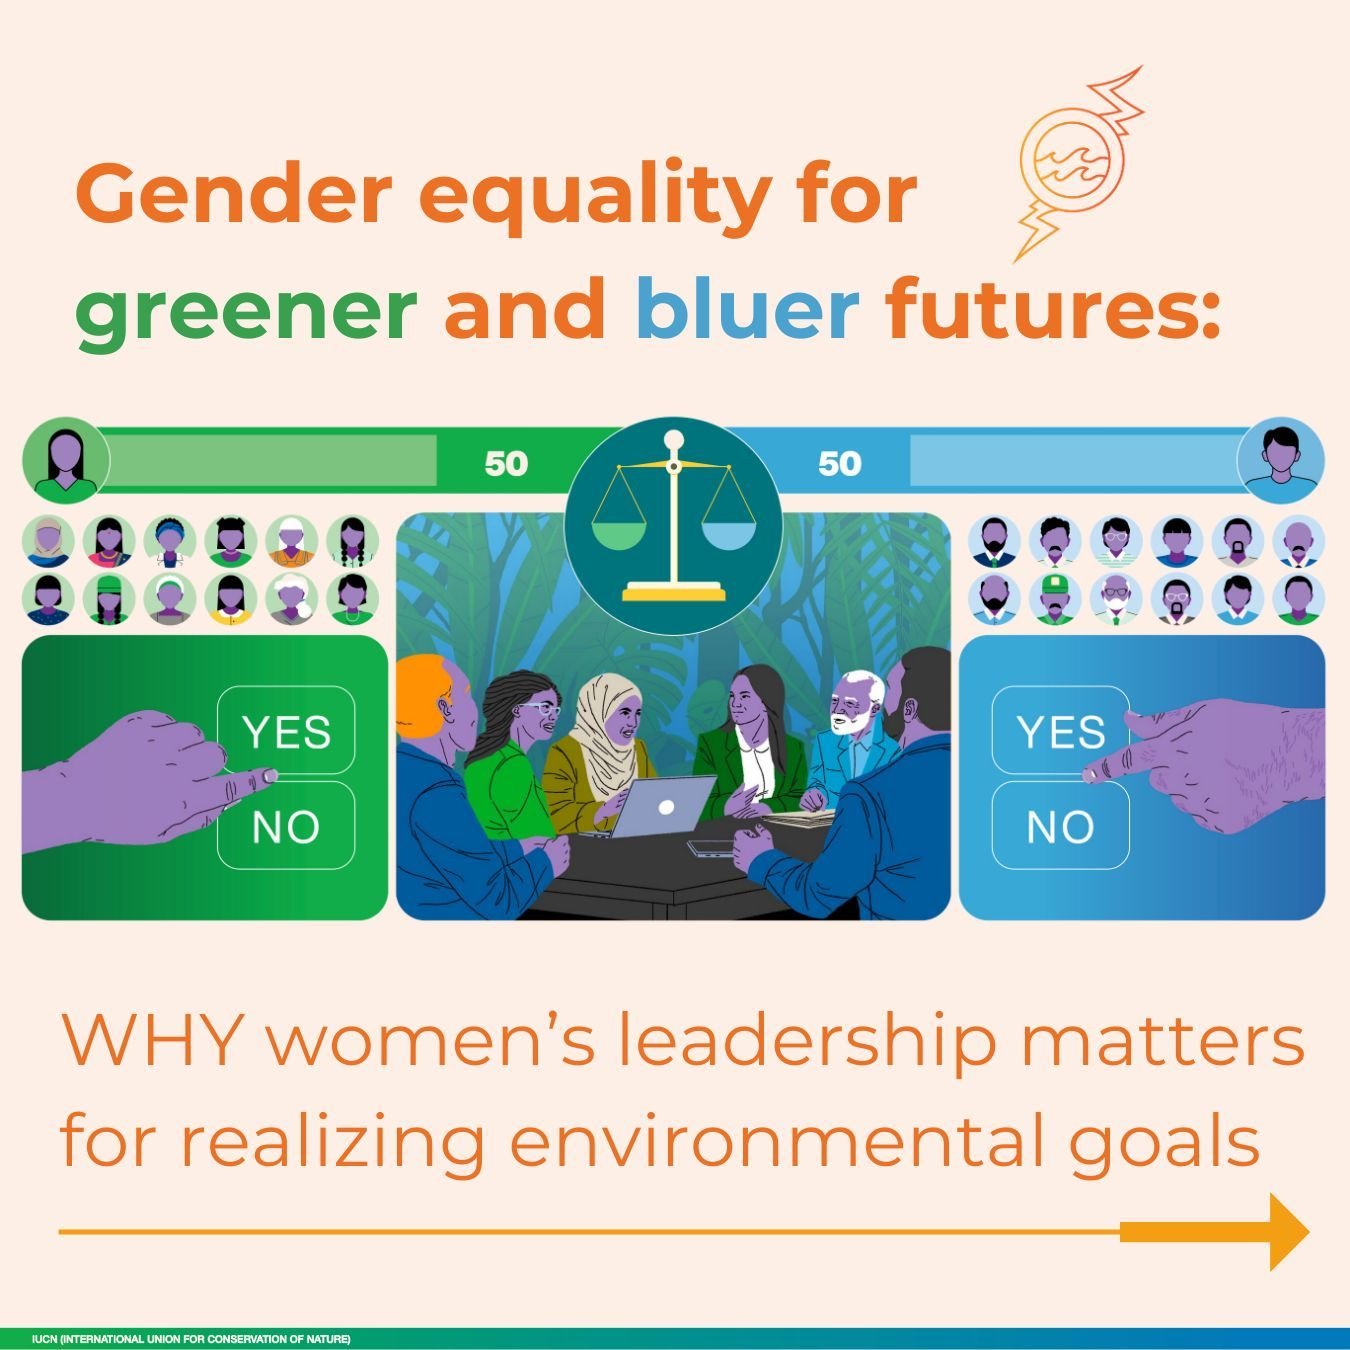 Women are gatherers and managers of natural resources, playing a KEY role in sustainable development. 🌍⁠
⁠
Their leadership in environmental decision-making&mdash;as well as the integration of efforts to build gender equality into conservation, sust